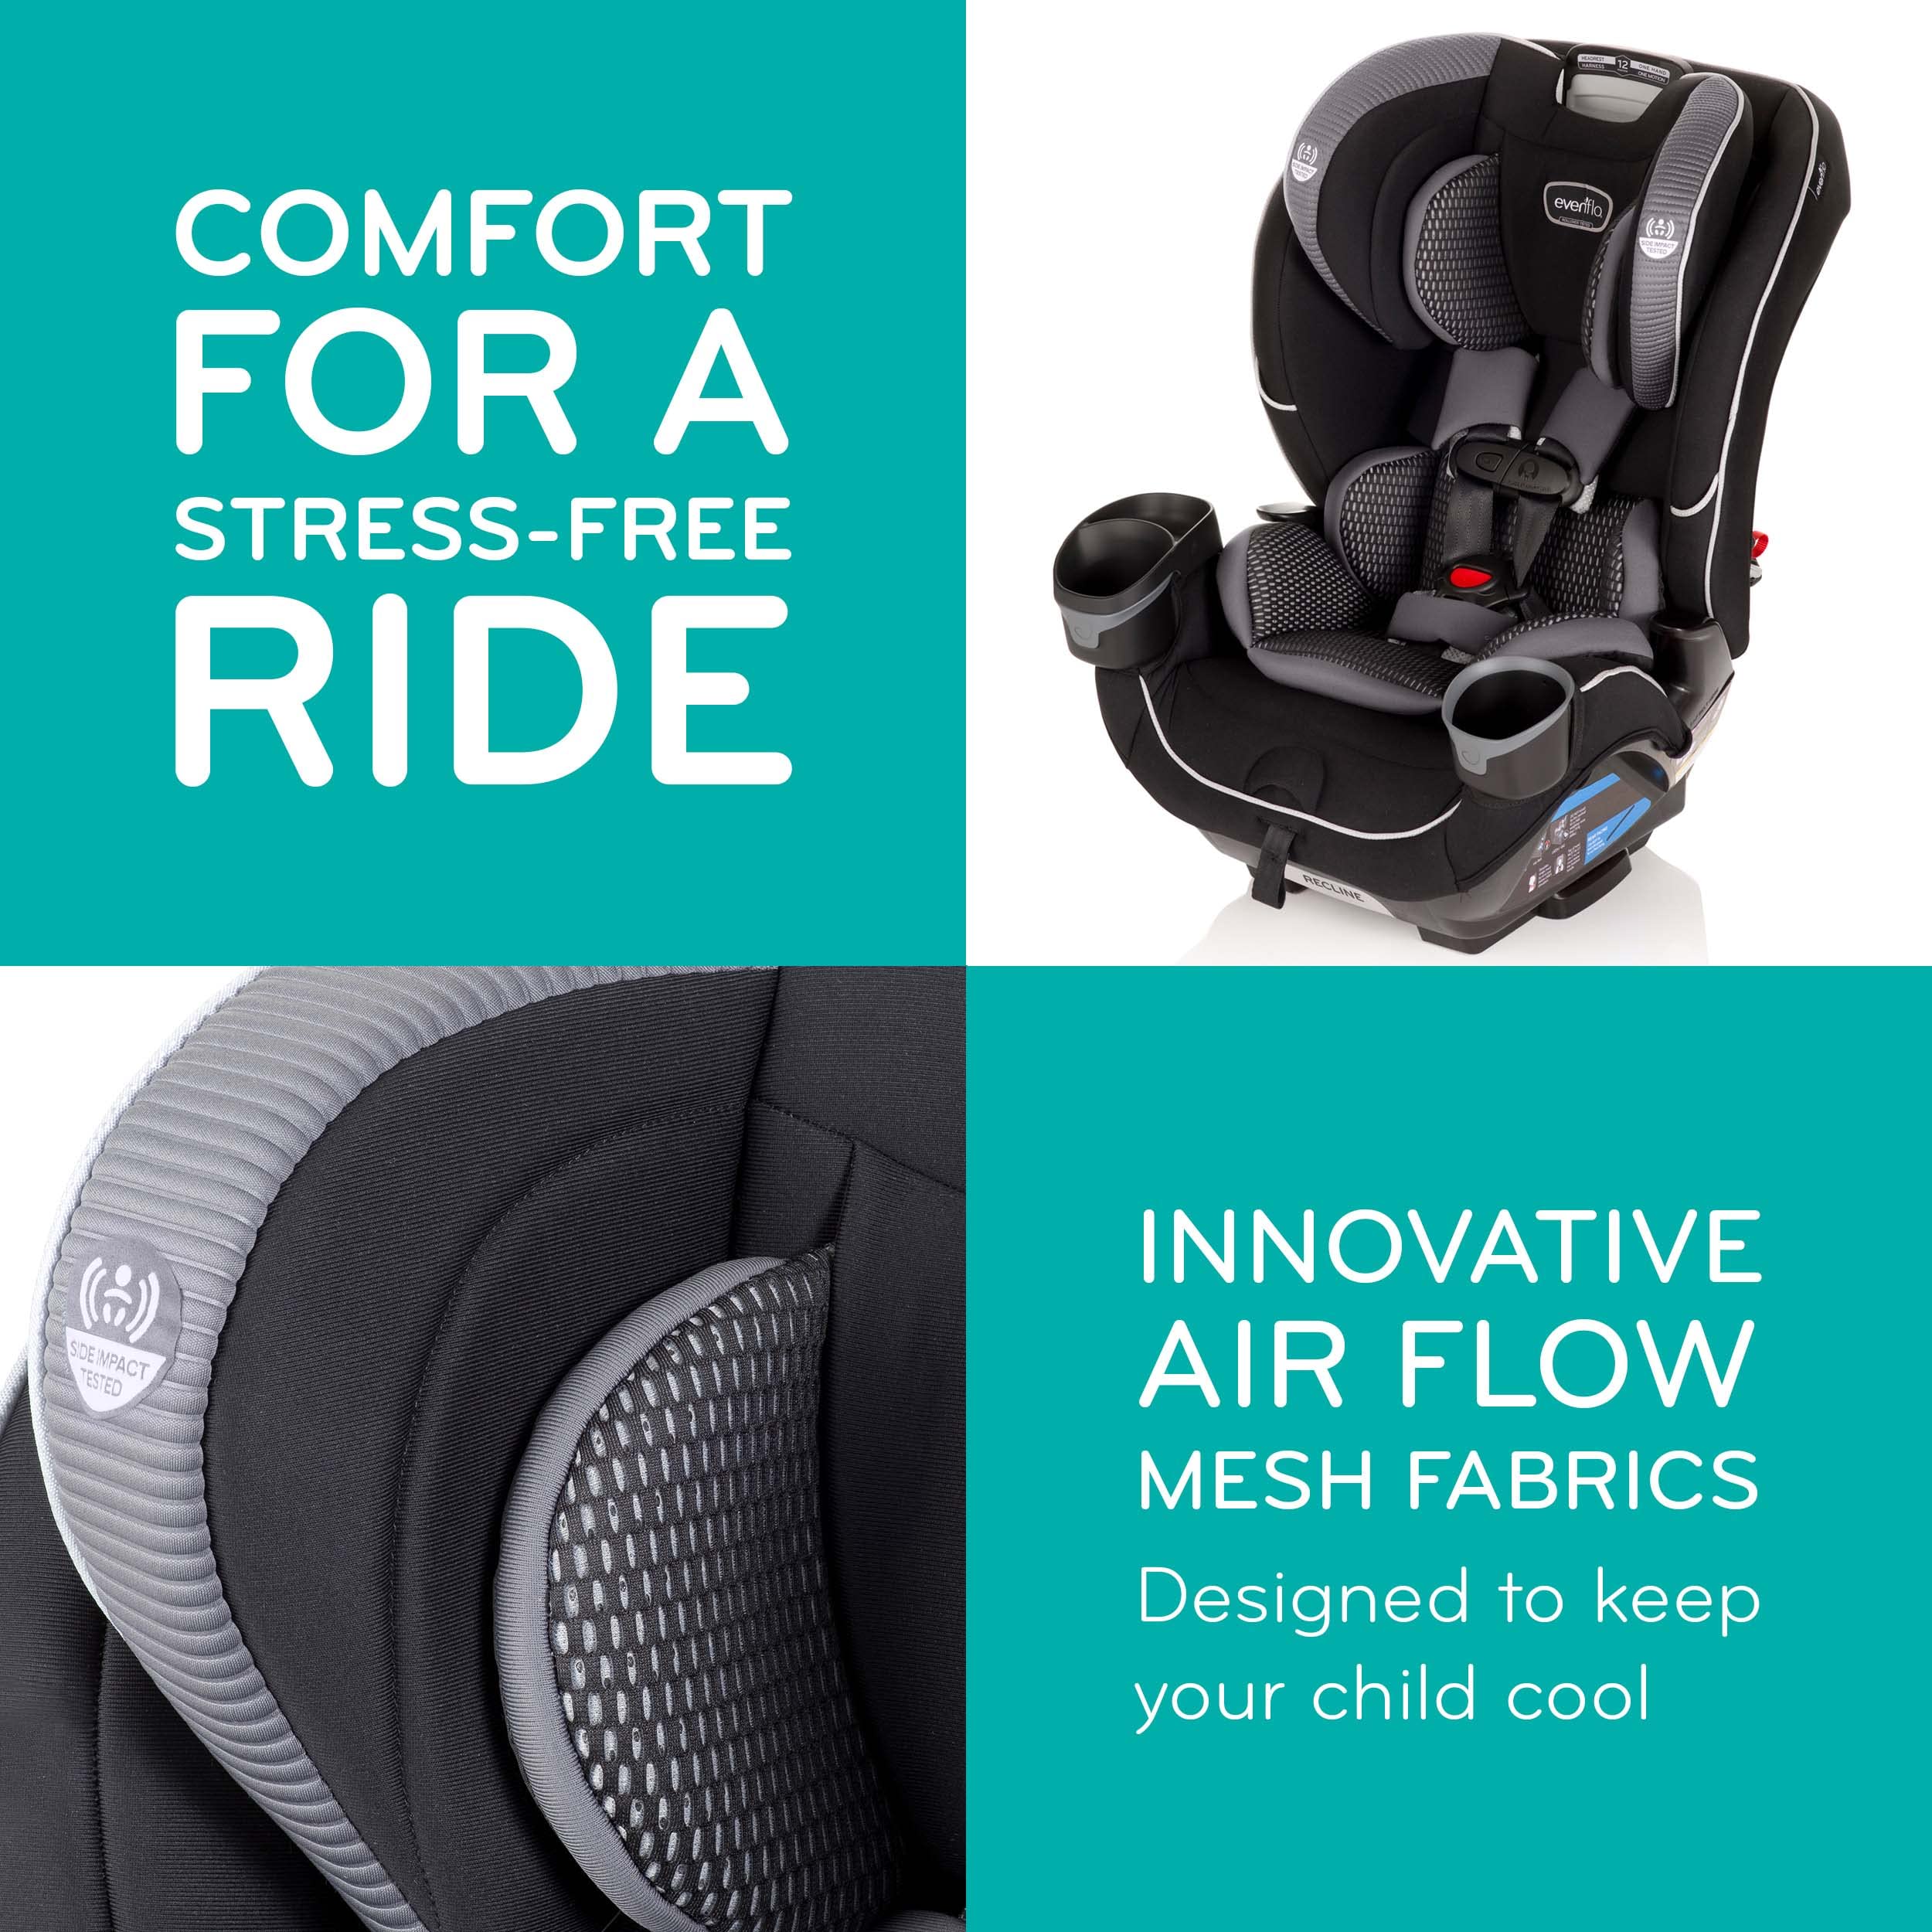 Evenflo EveryFit 4-in-1 Convertible Car Seat Featuring 12-Position Headrest, Two Integrated Cup Holders, Removable Snack Tray, and Machine-Washable Fabric (Olympus Black)